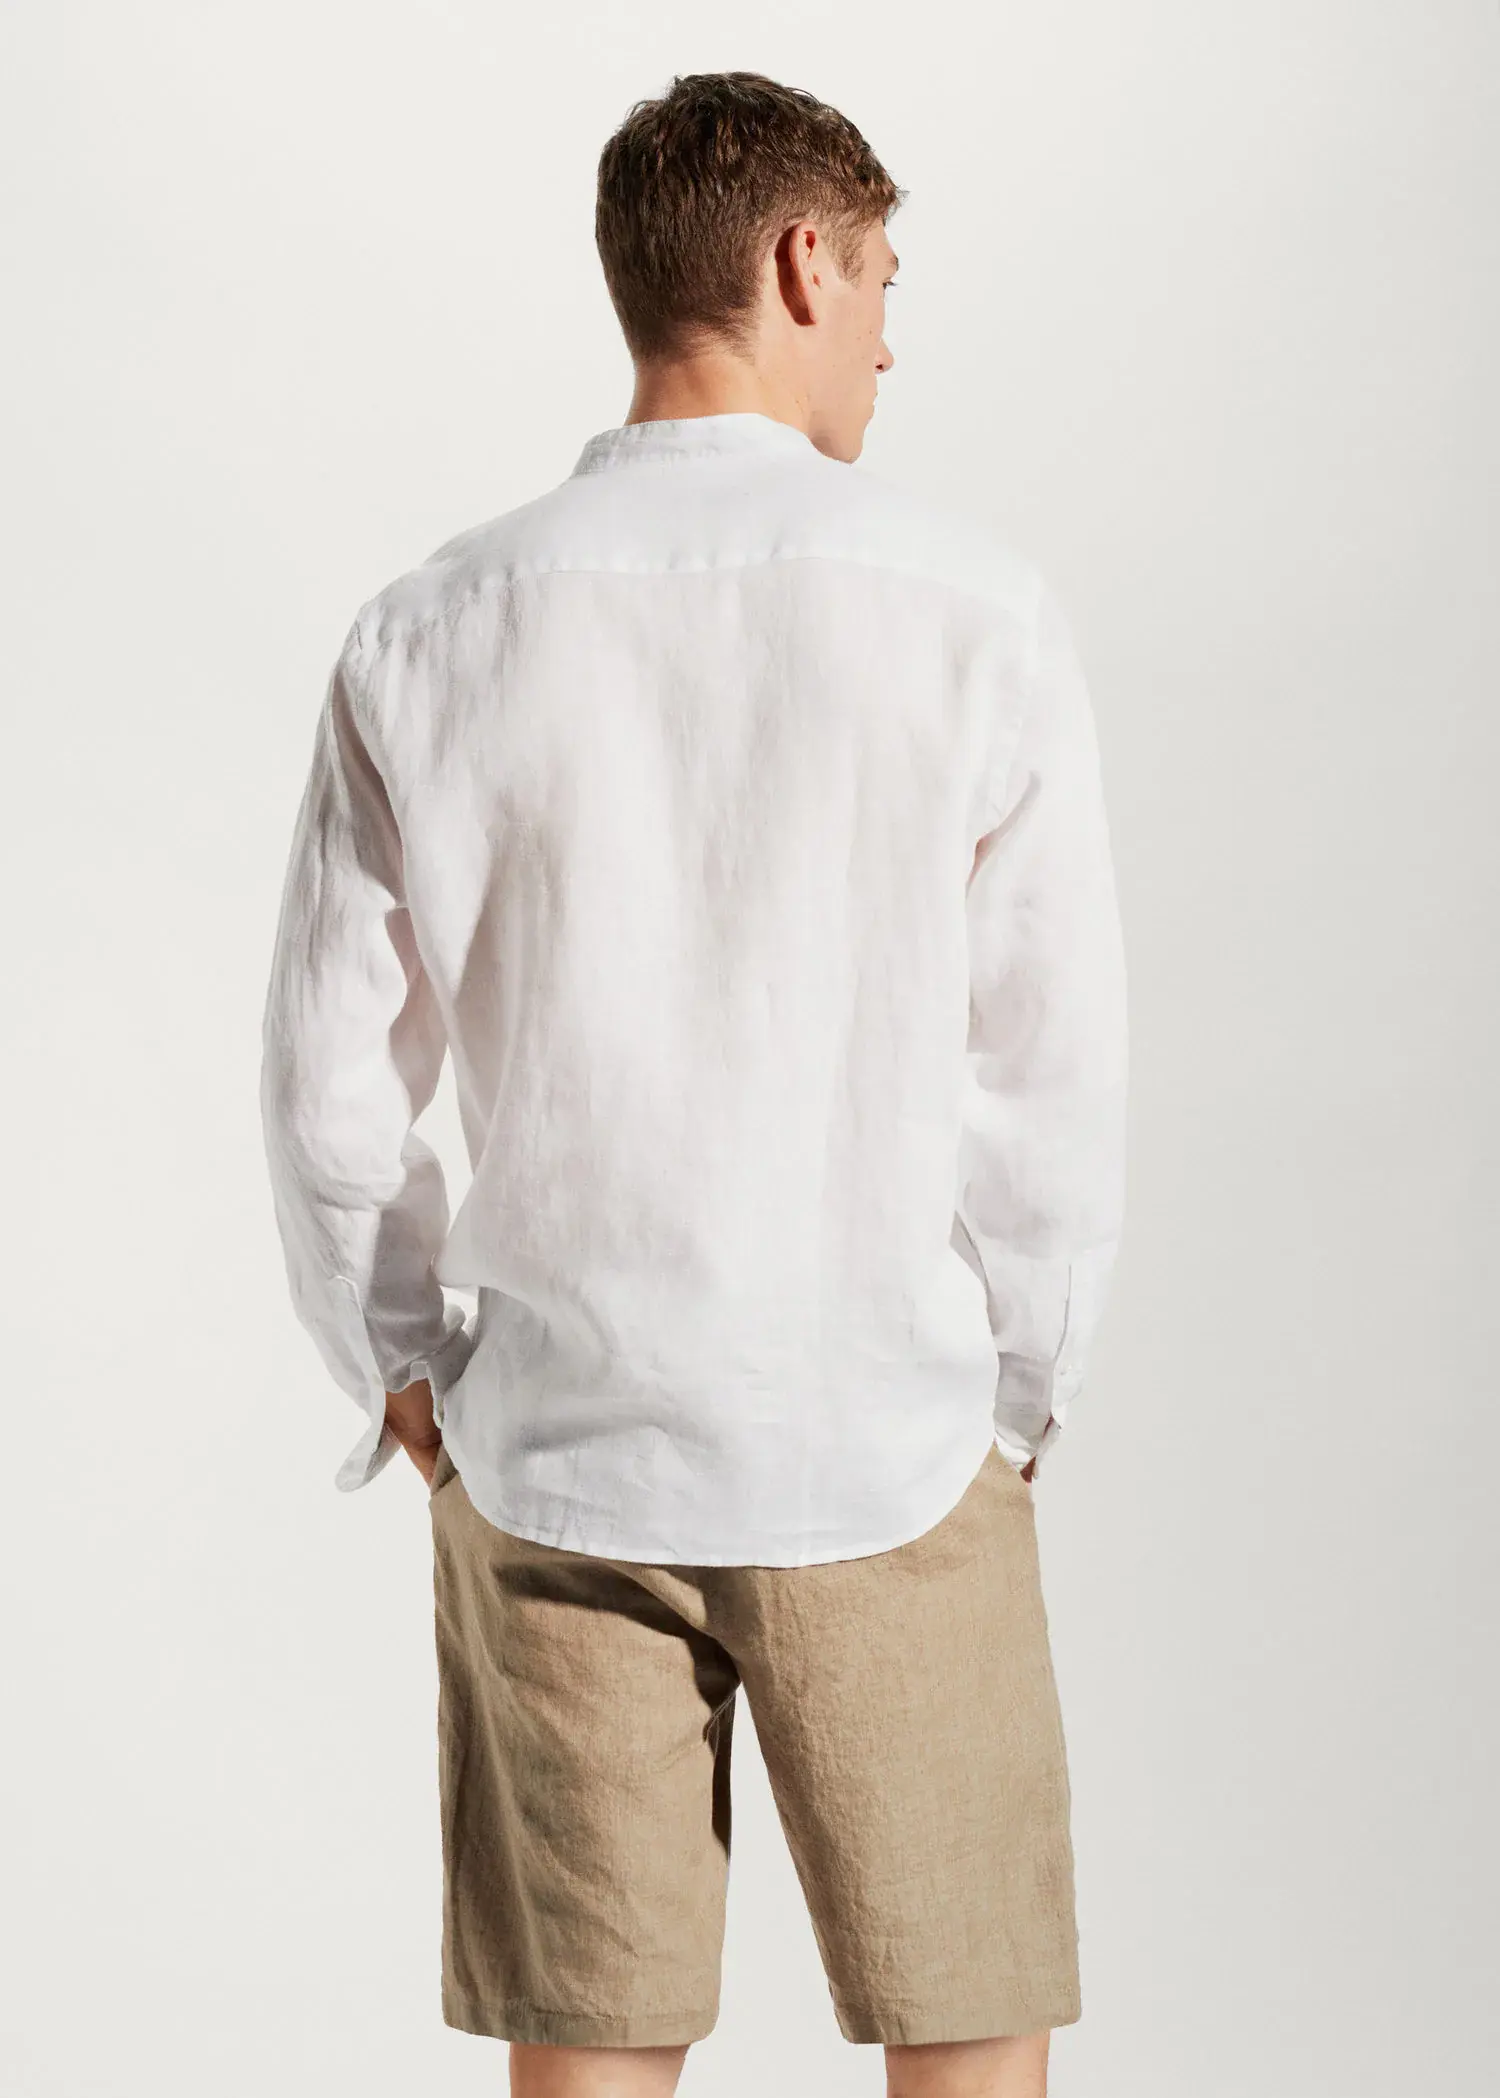 Mango 100% linen Mao collar shirt. a man in a white shirt is standing with his hands in his pockets. 